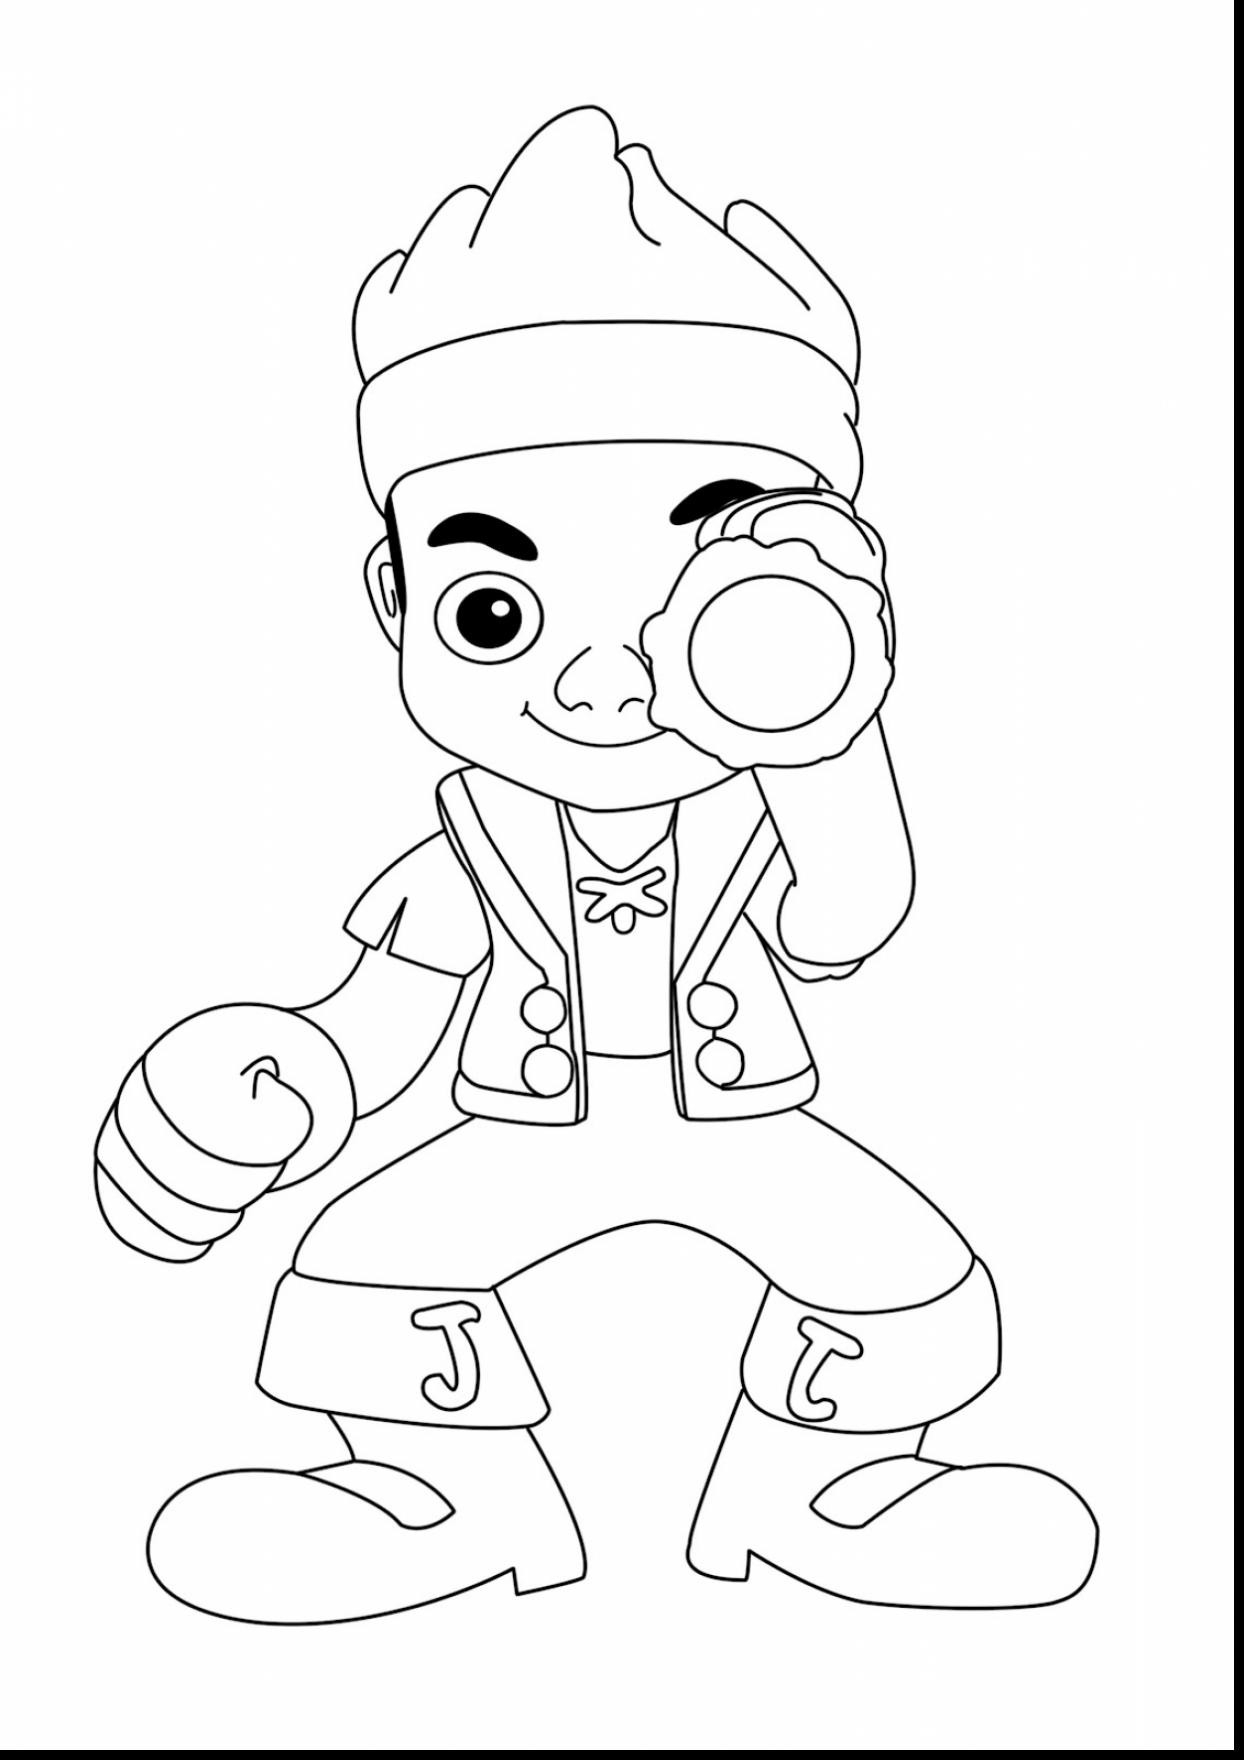 Izzy Coloring Pages at GetColorings.com | Free printable colorings